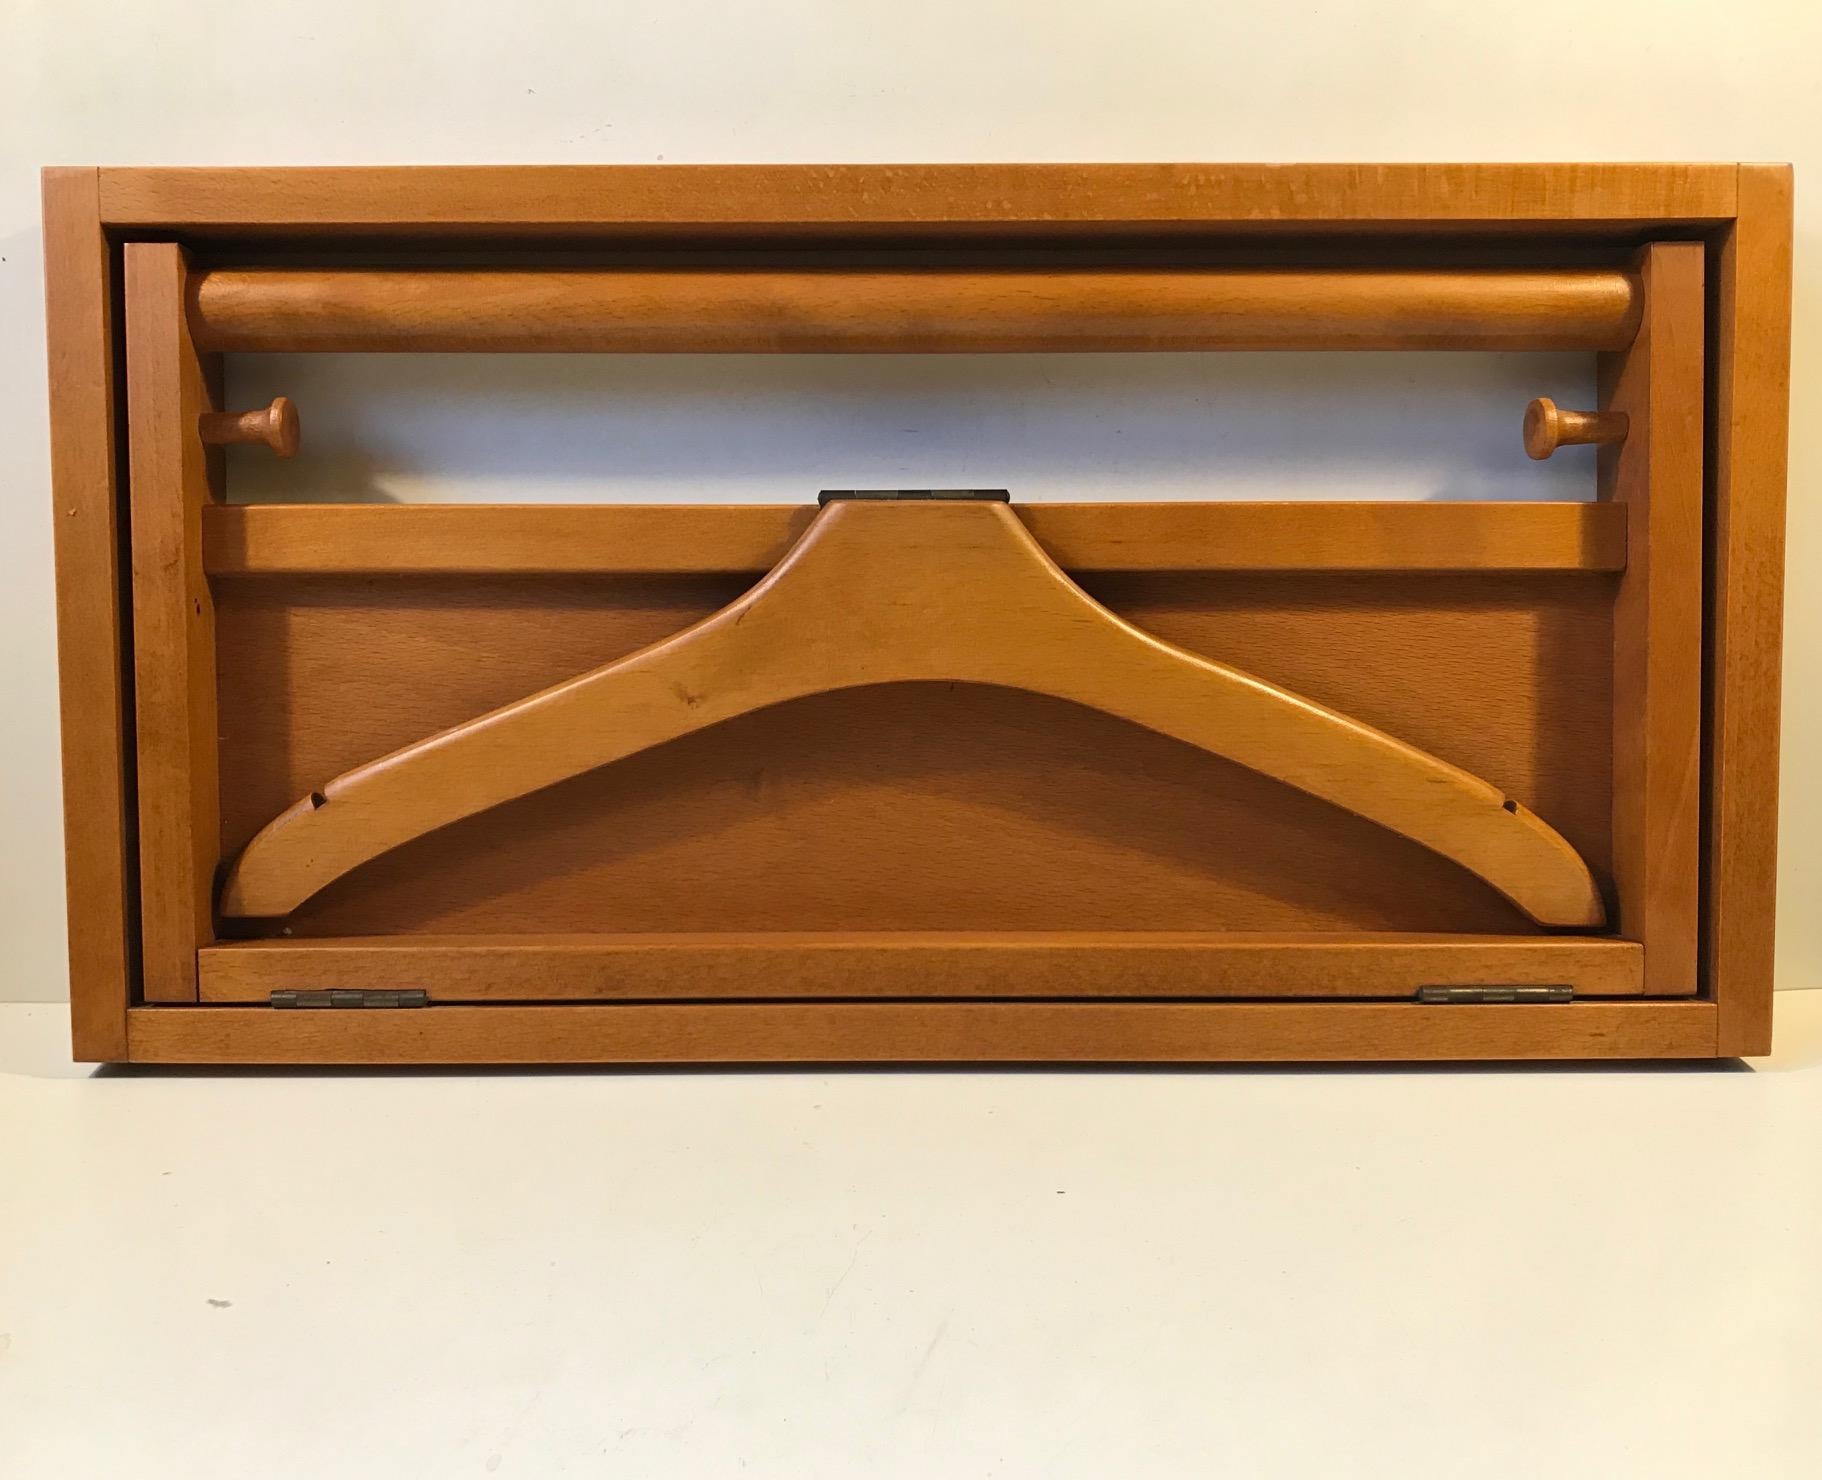 Foldable wall valet in solid cherrywood. Designed and manufactured in Scandinavia in a style reminiscent of Adam Hoff & Poul Østergaard.